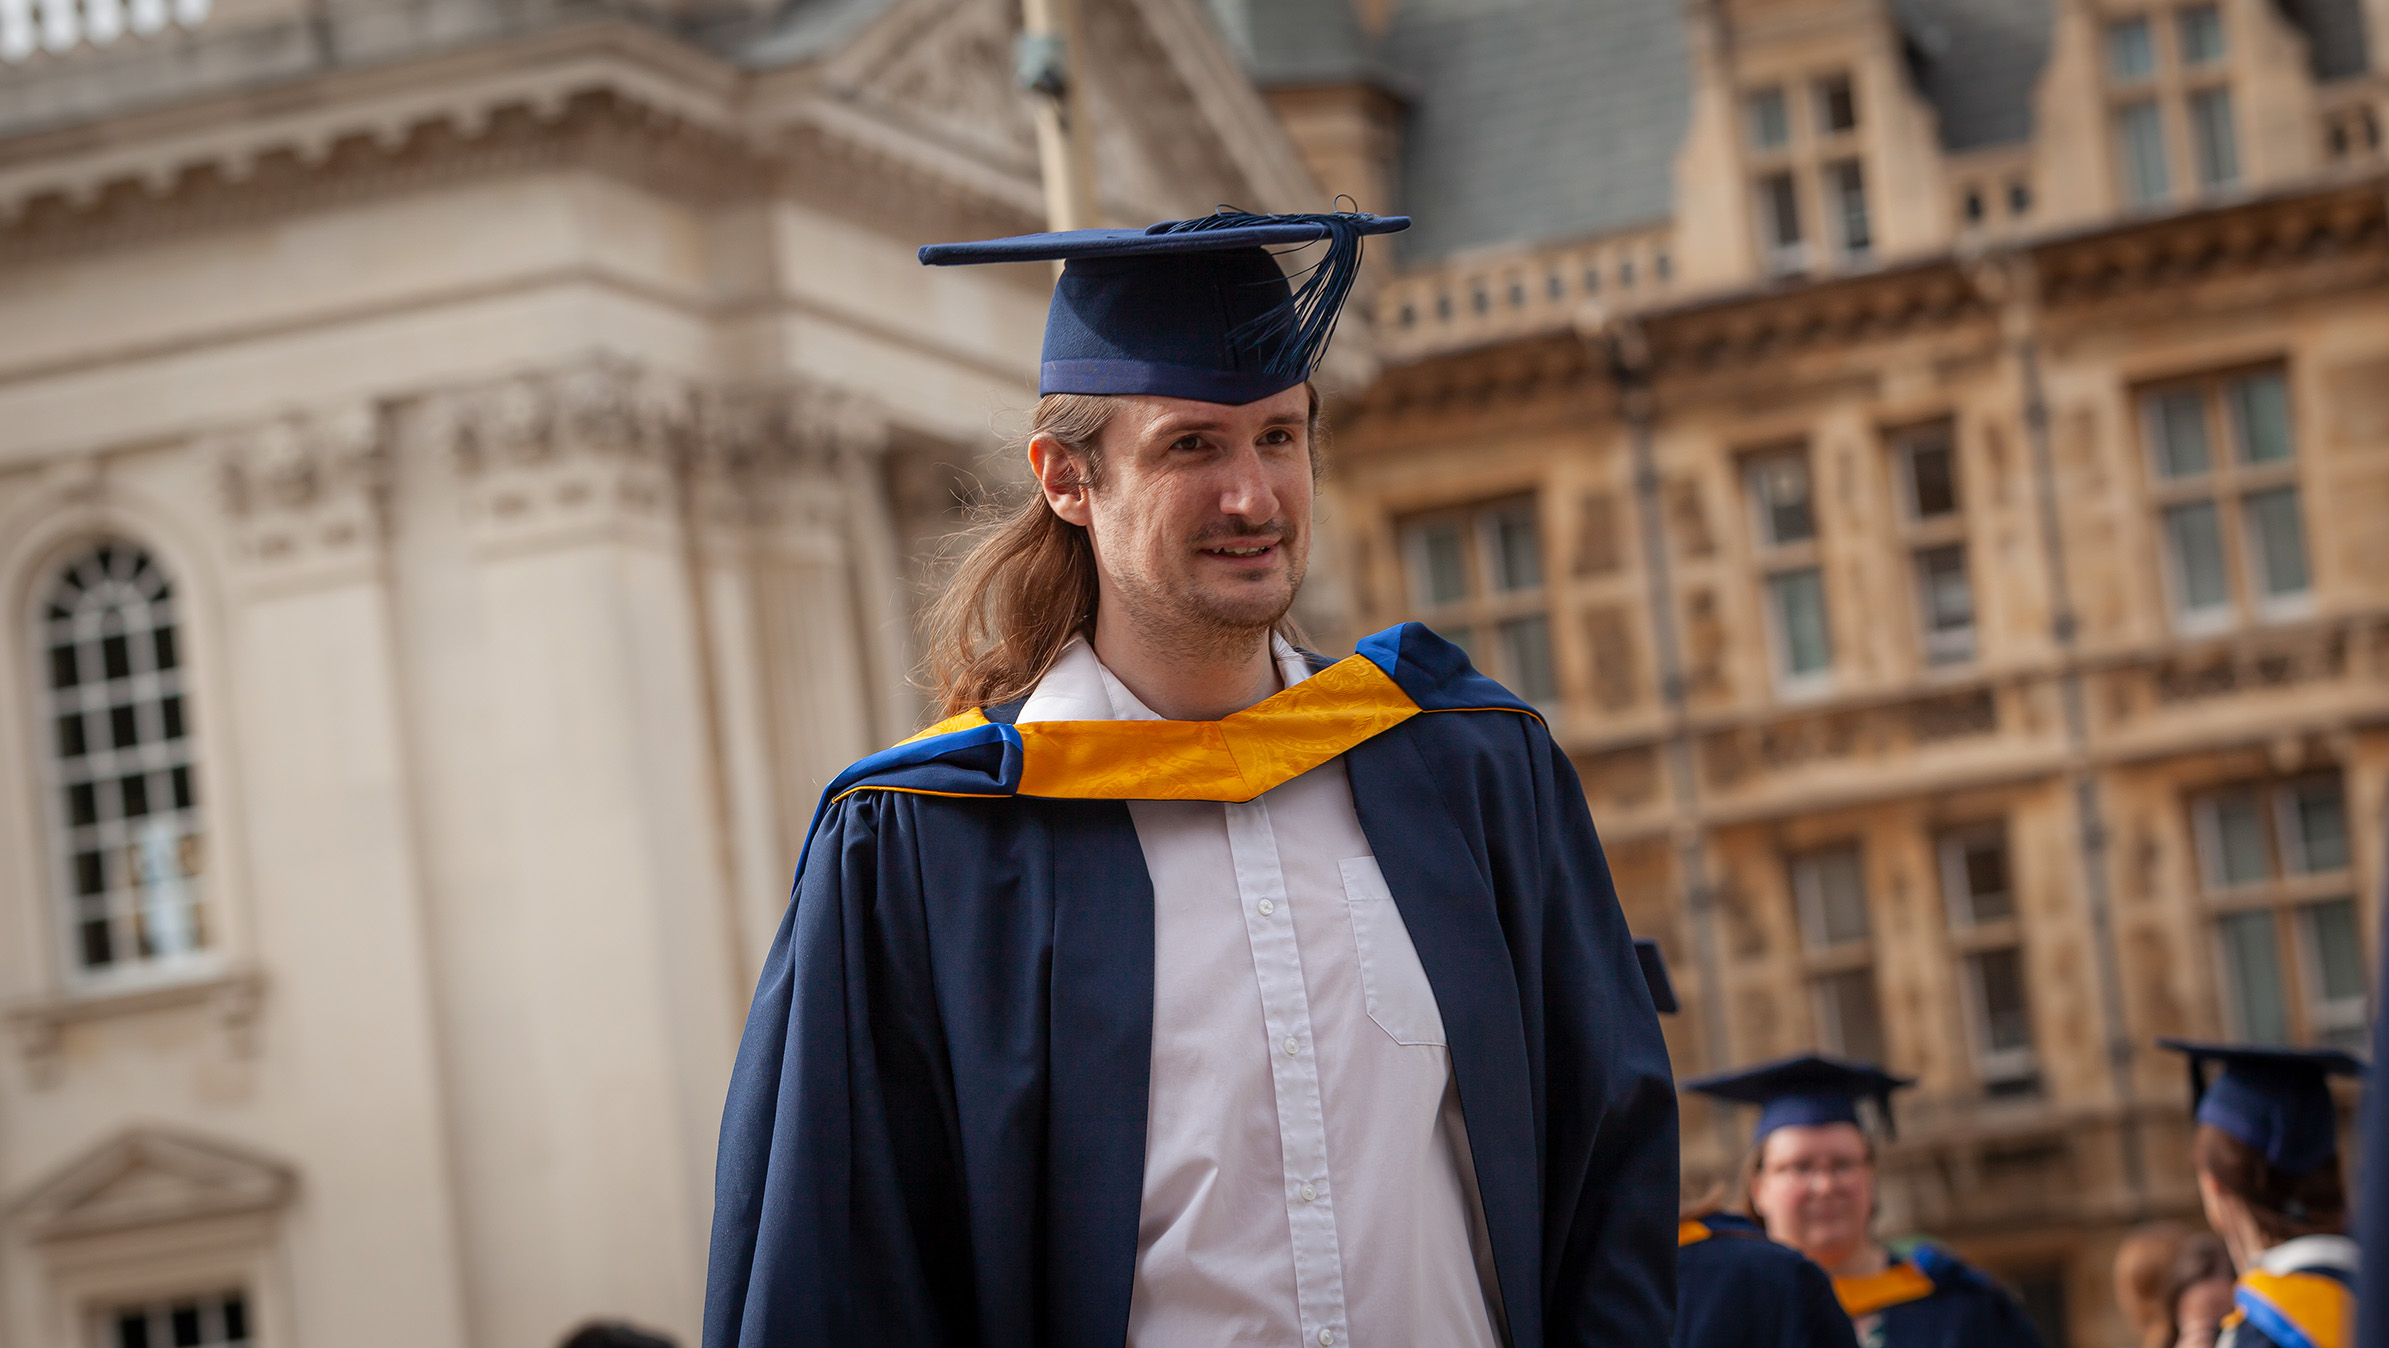 Data scientist graduate, Adam Sanigar, outside the Old Schools building walks toward the Cambridge Corn Exchange dressed in a navy and yellow cap and gown for the graduation ceremony.